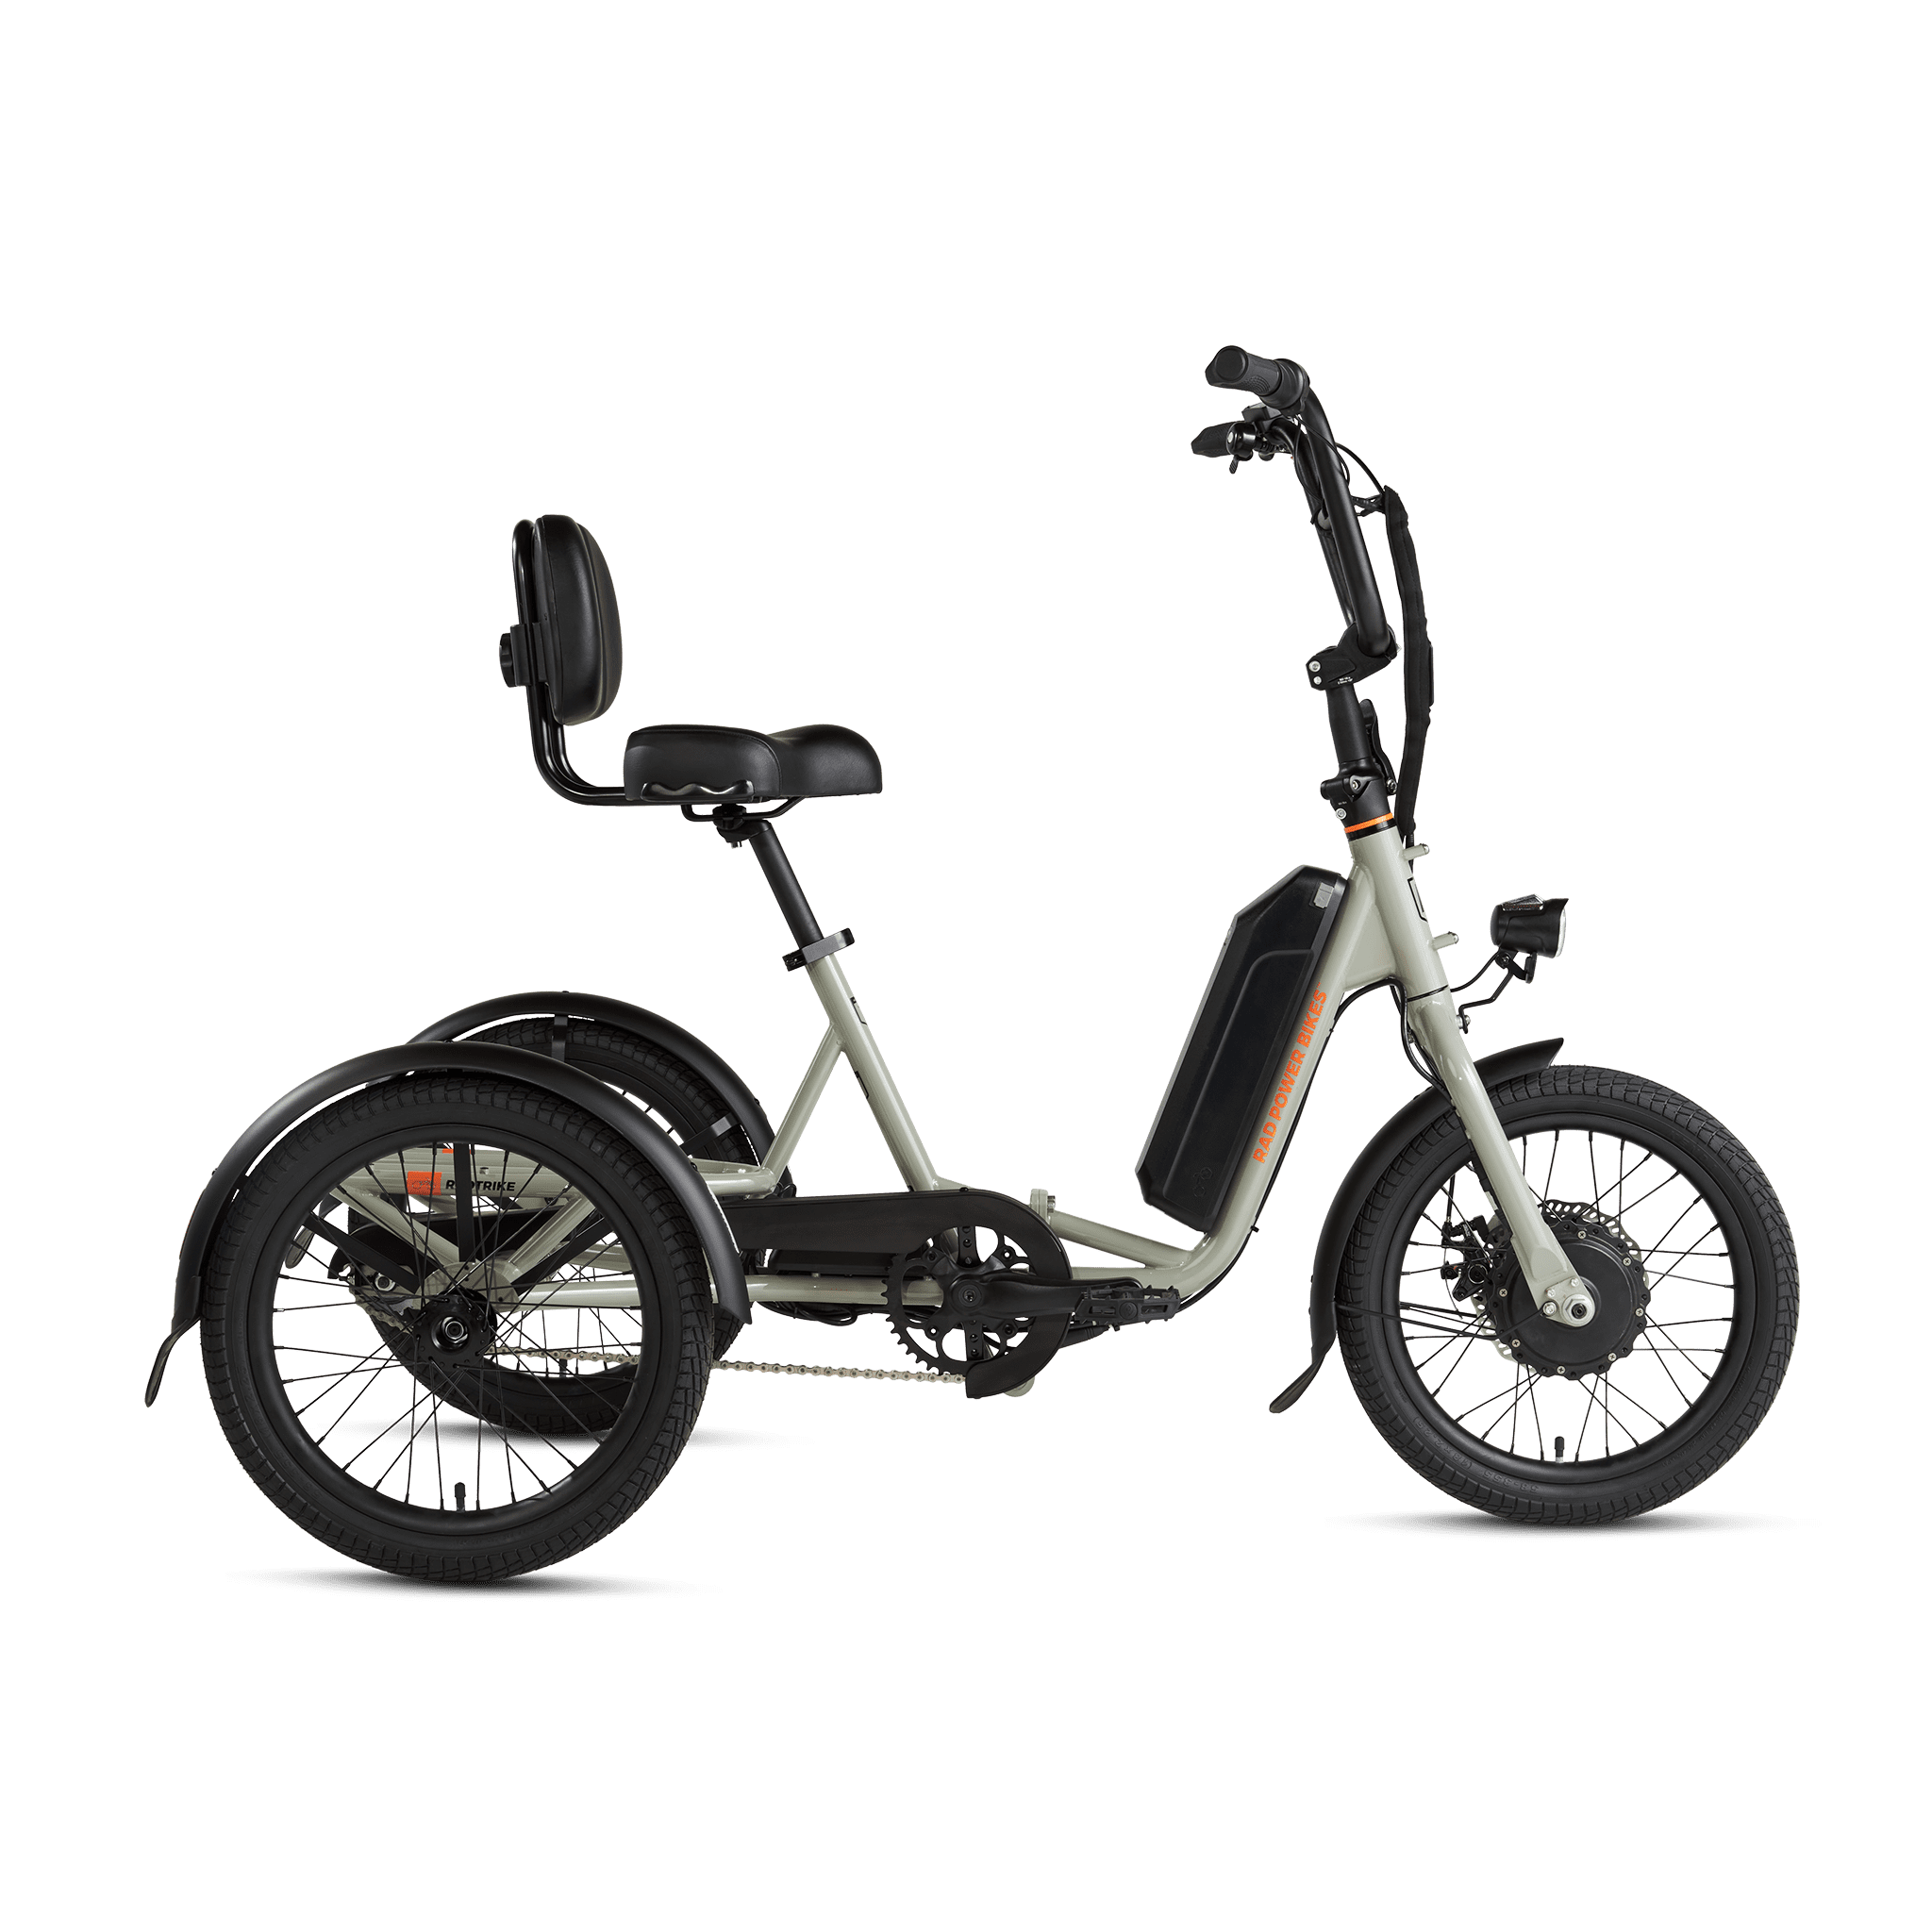 RadTrike Electric Tricycle - Cycleson